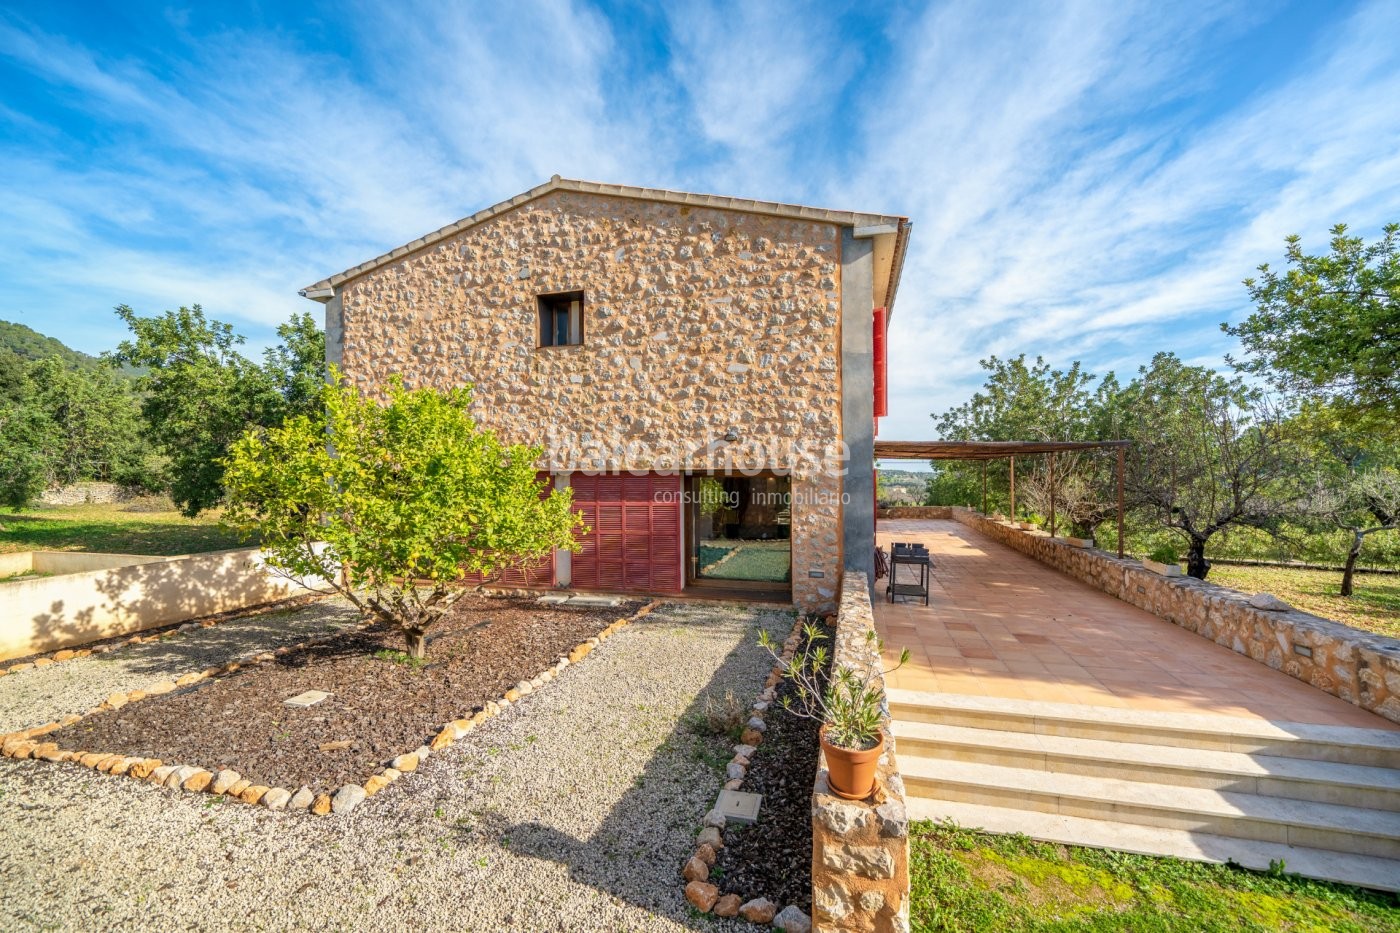 Large finca in Selva, a mixture of tradition and modernity with land holiday licence.